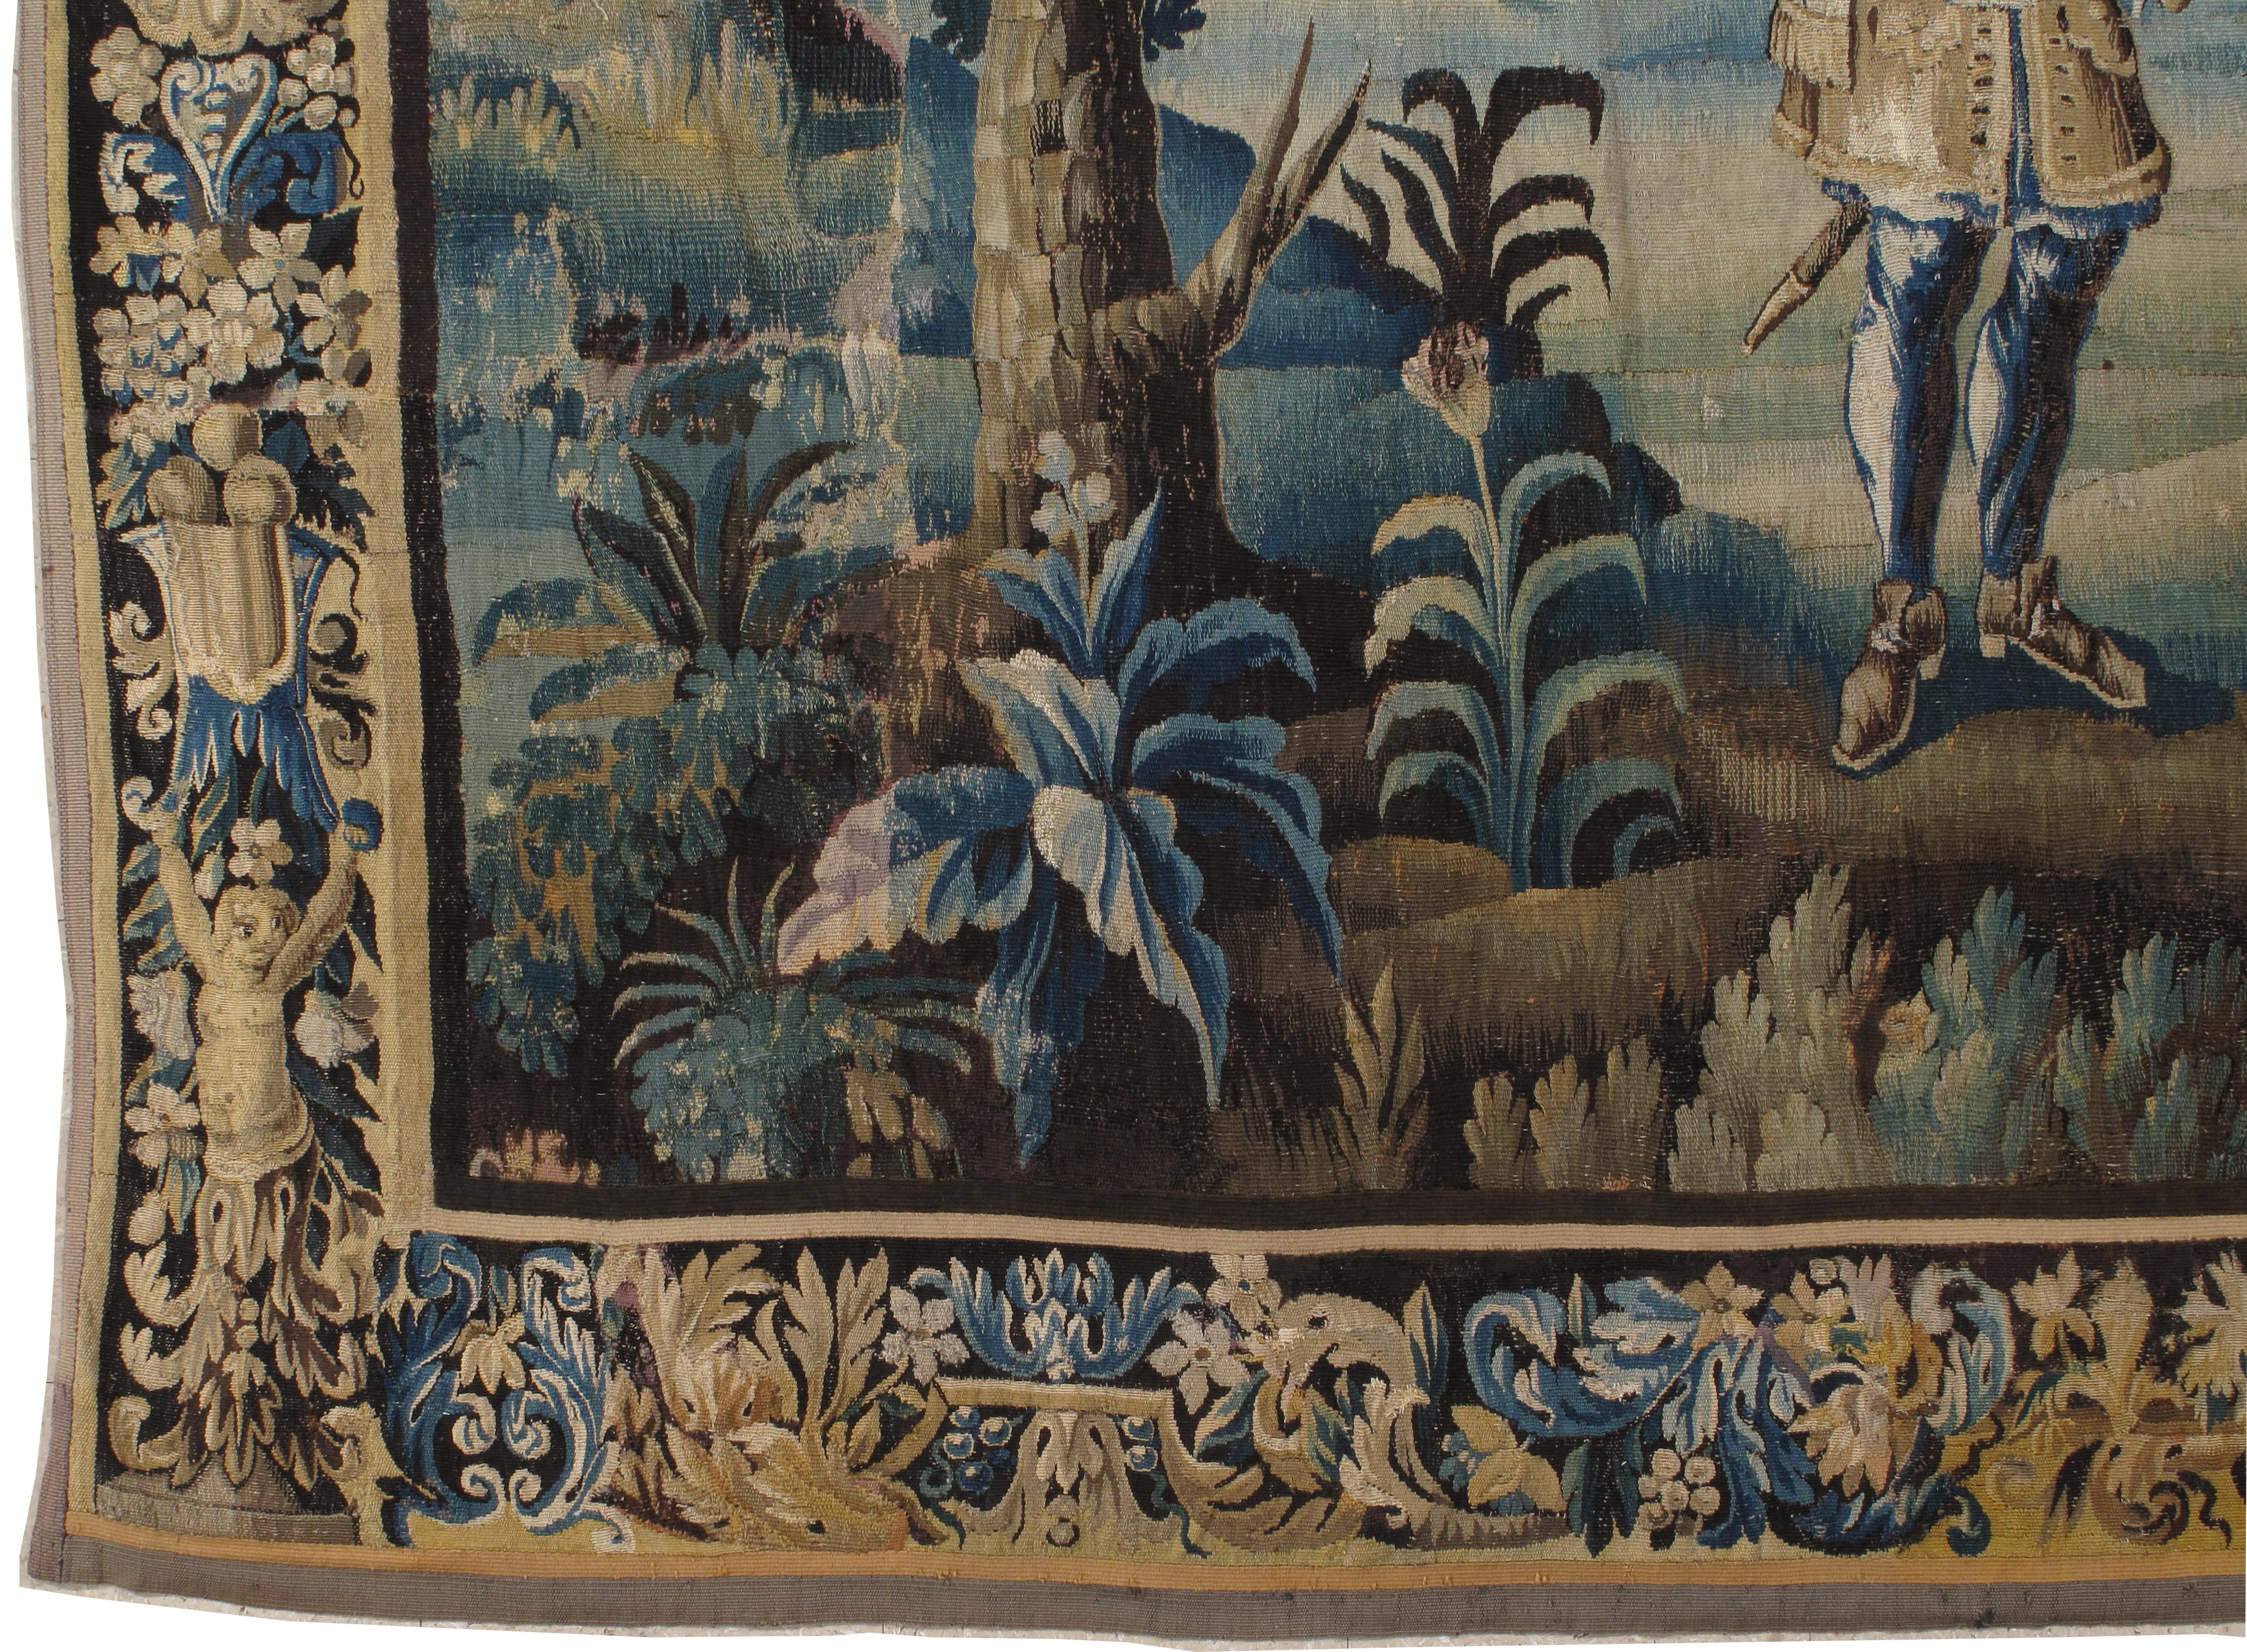 This magnificent tapestry was woven in Flanders during the middle of the European Renaissance, in the late 1700s. At this time, Flanders was creating some of the best textiles in the world, and many of the rich wooded scenes with animals and hunting